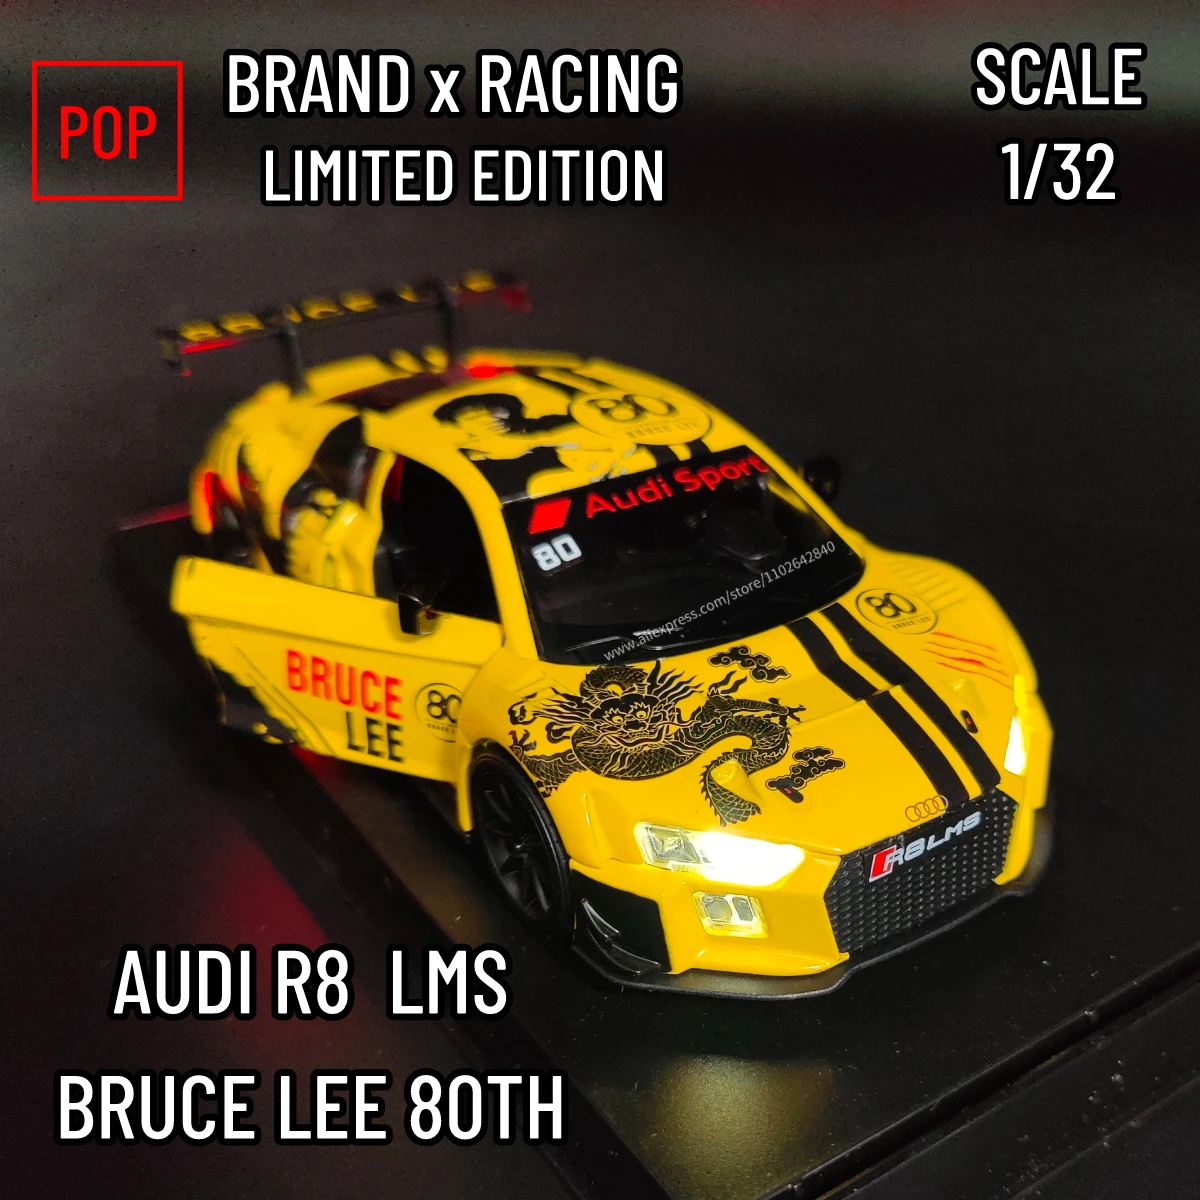 Scale 1:32 Limited Edition AUDI X BRUCE LEE Rally Racing Car Model R8 LMS GT3 Replica Off Road Miniature Kid Boy Xmas Gift Toy